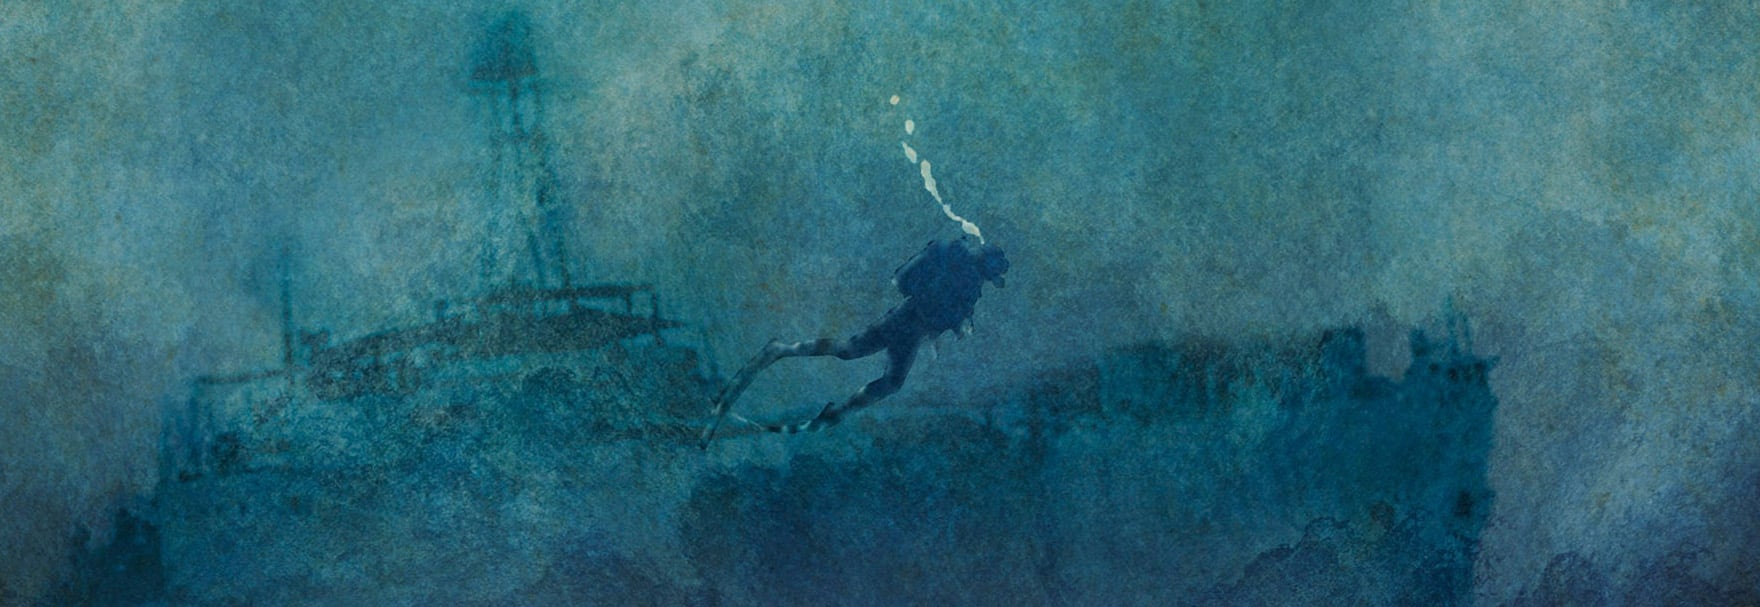 Painting of a diver underwater. The outline of a ship is just about visible behind him through the murky water.